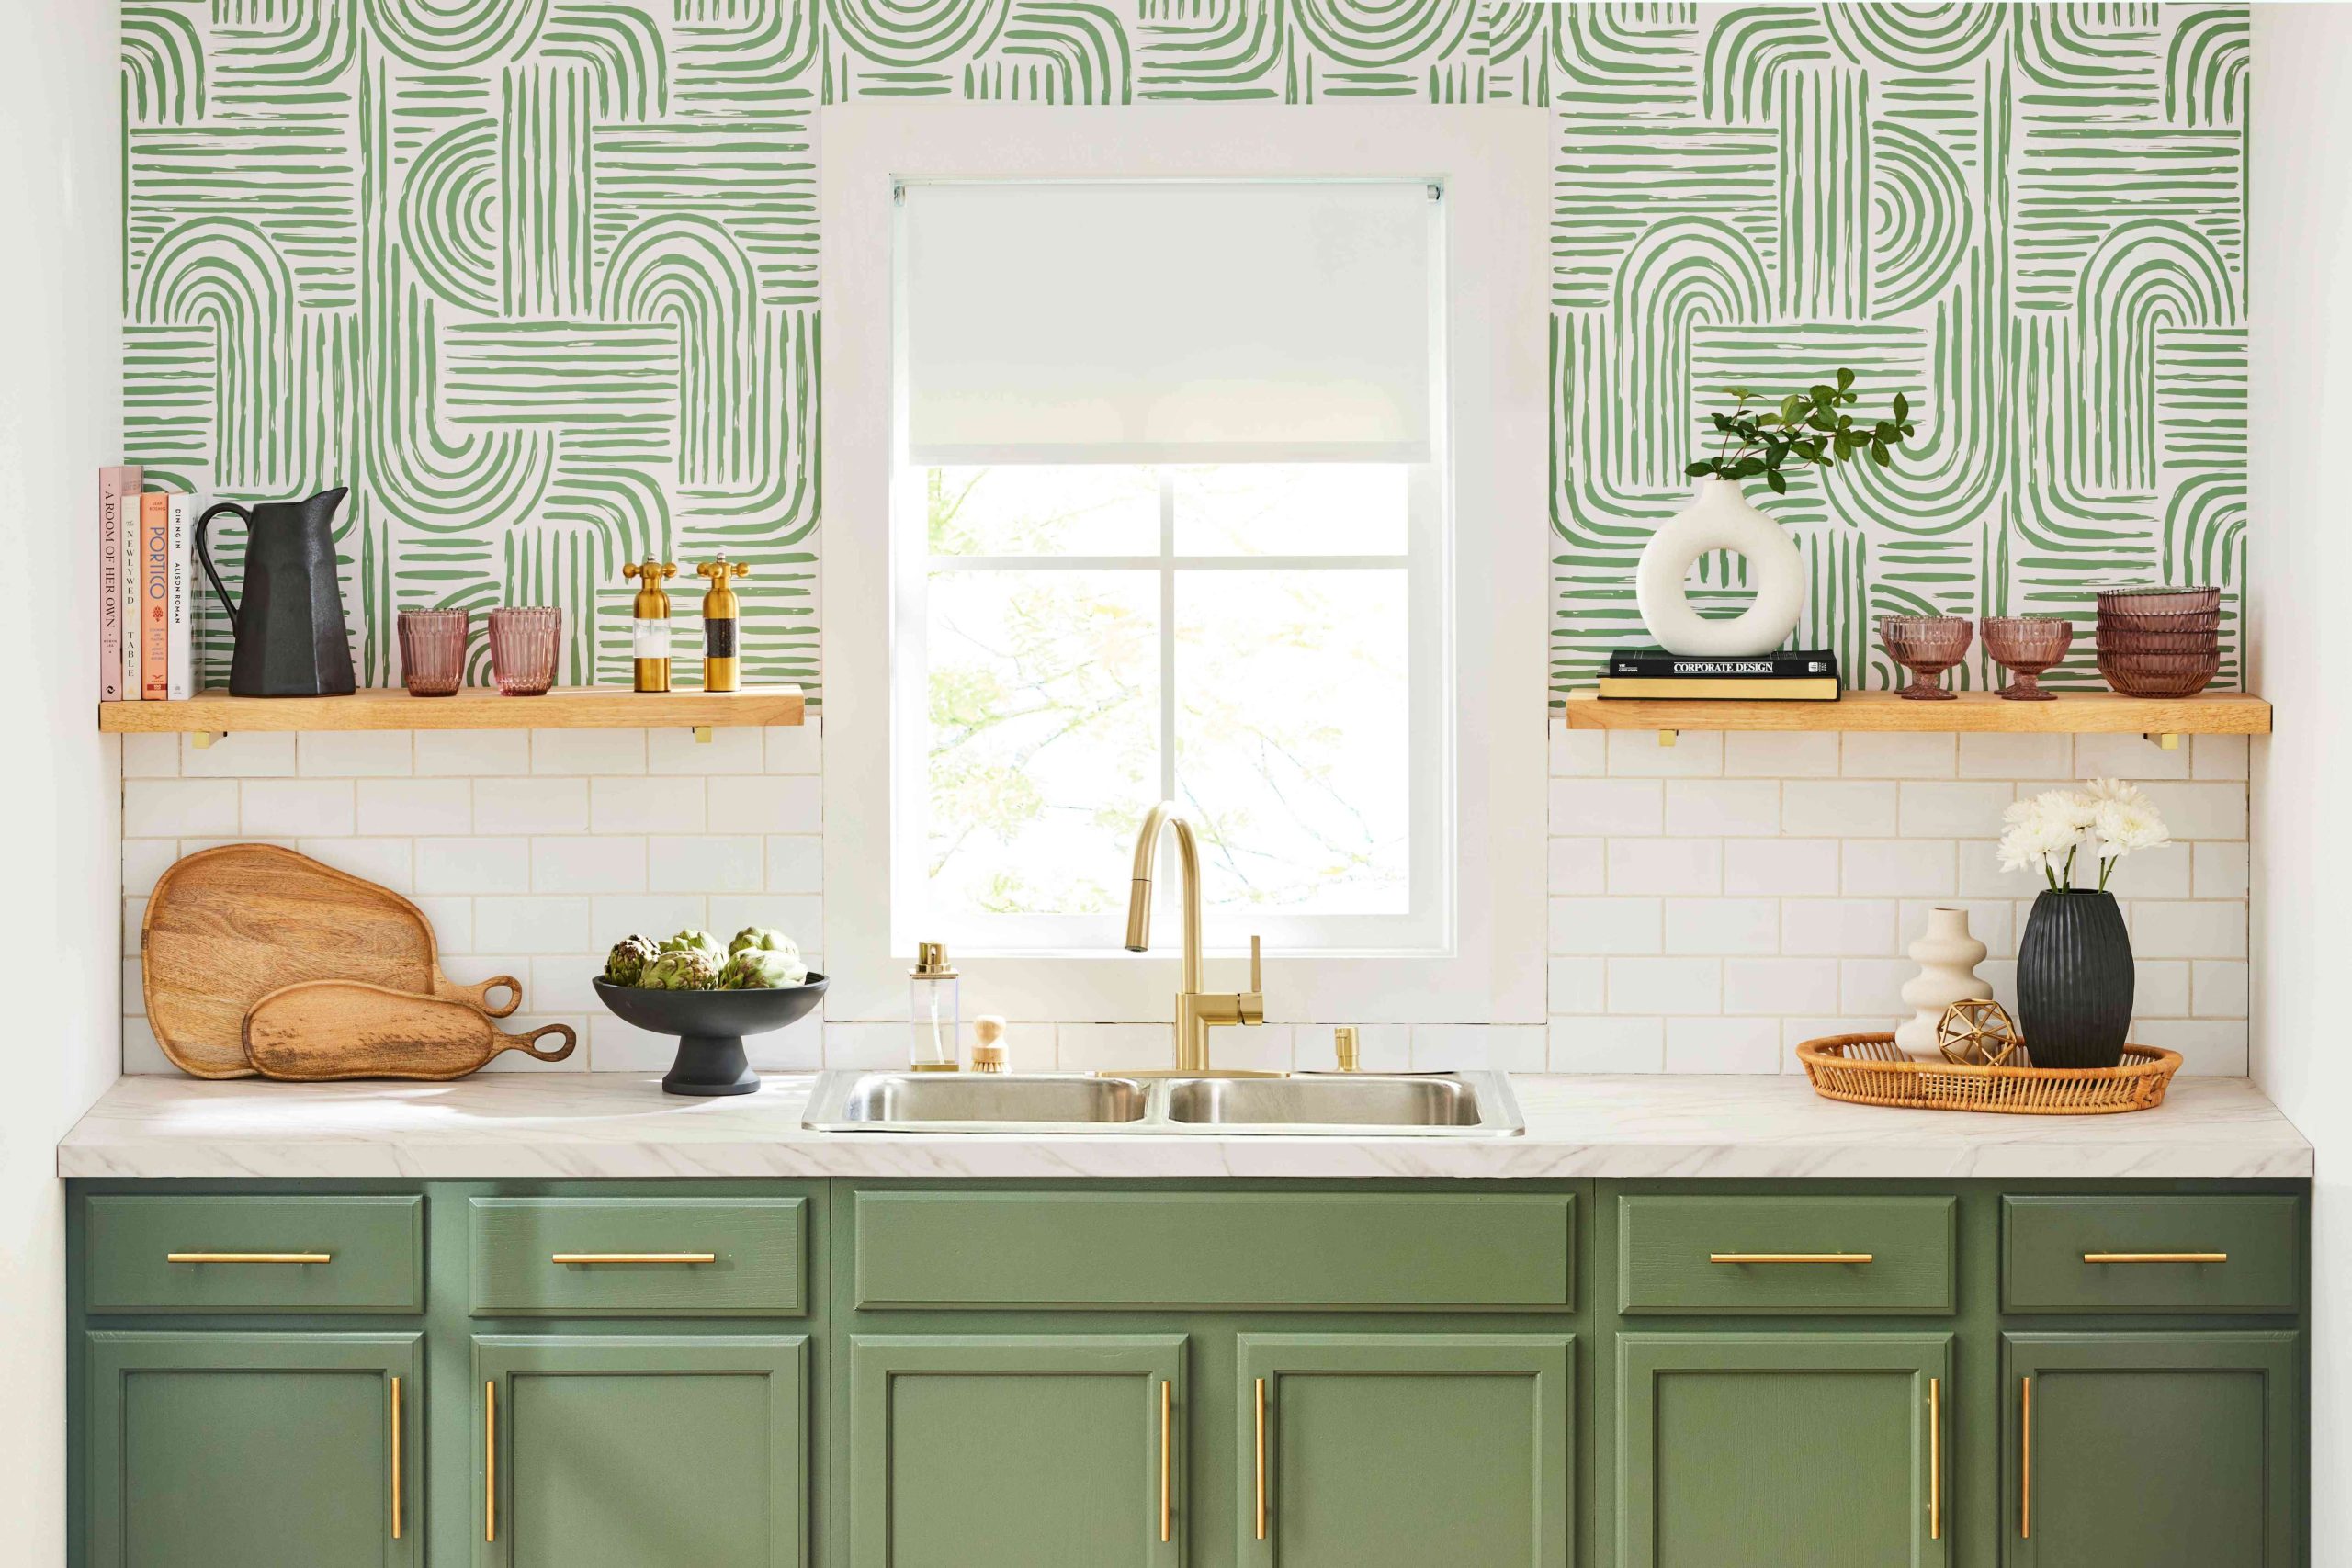 Kitchen Wallpaper Ideas to Personalize Your Space